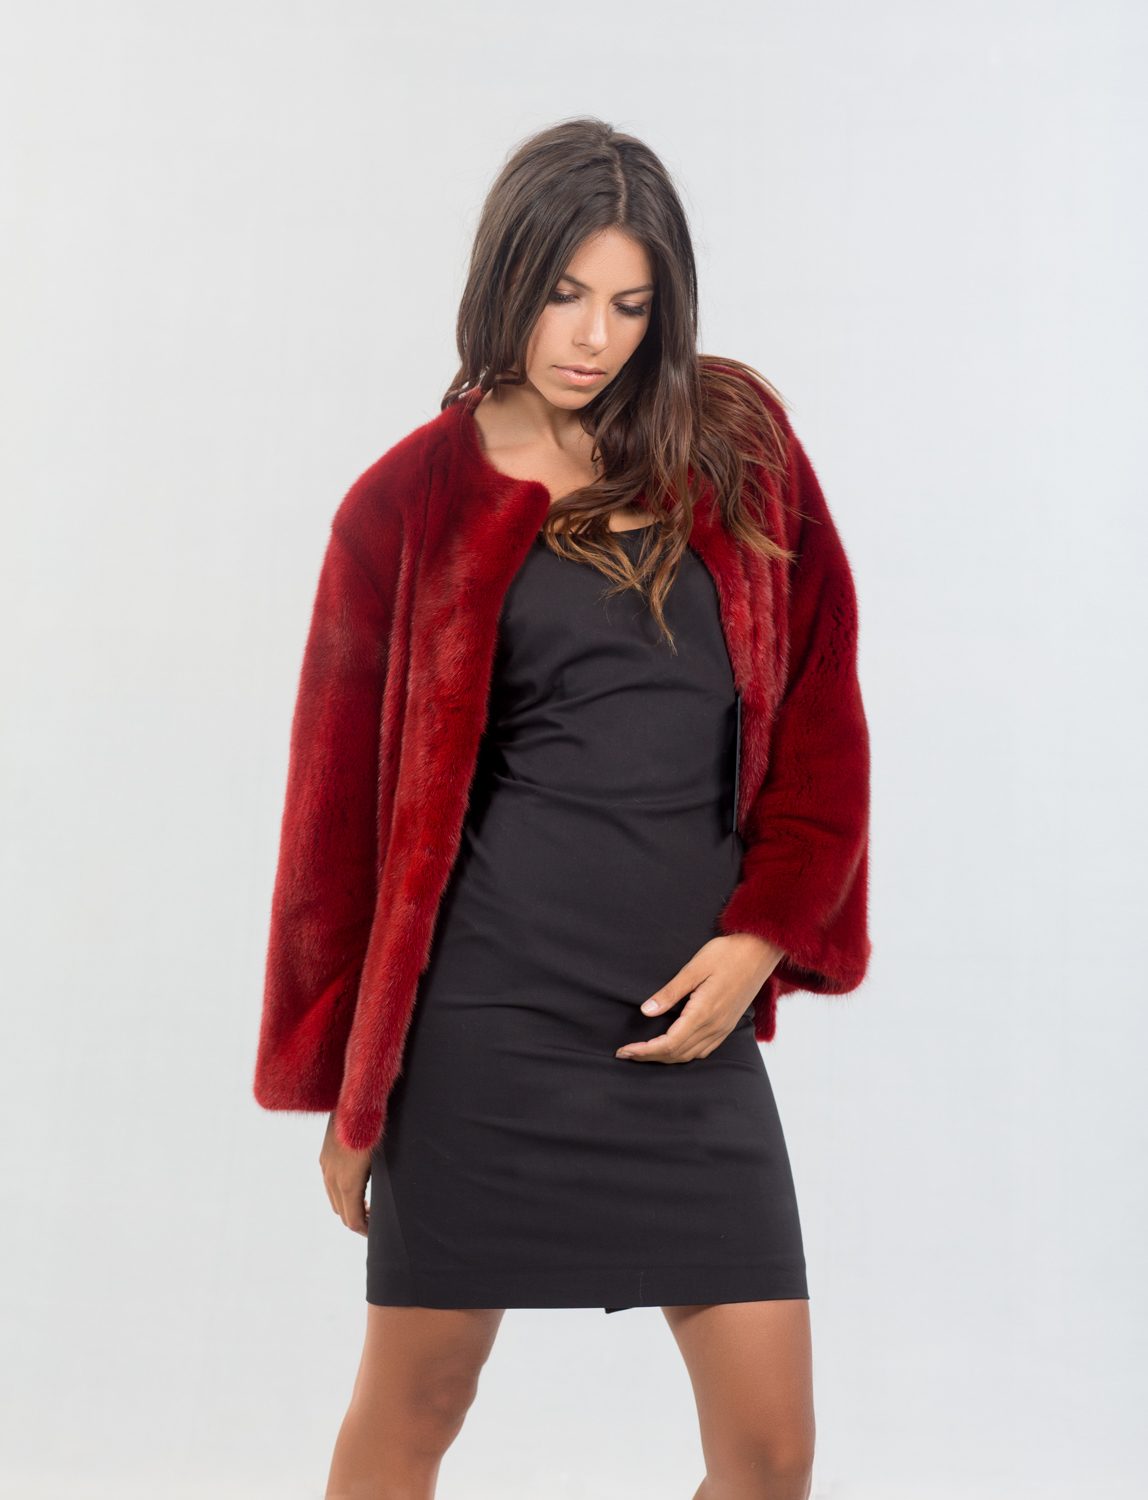 Nafa Mink Male Red Fur Jacket. 100% Real Fur Coats and Accessories.